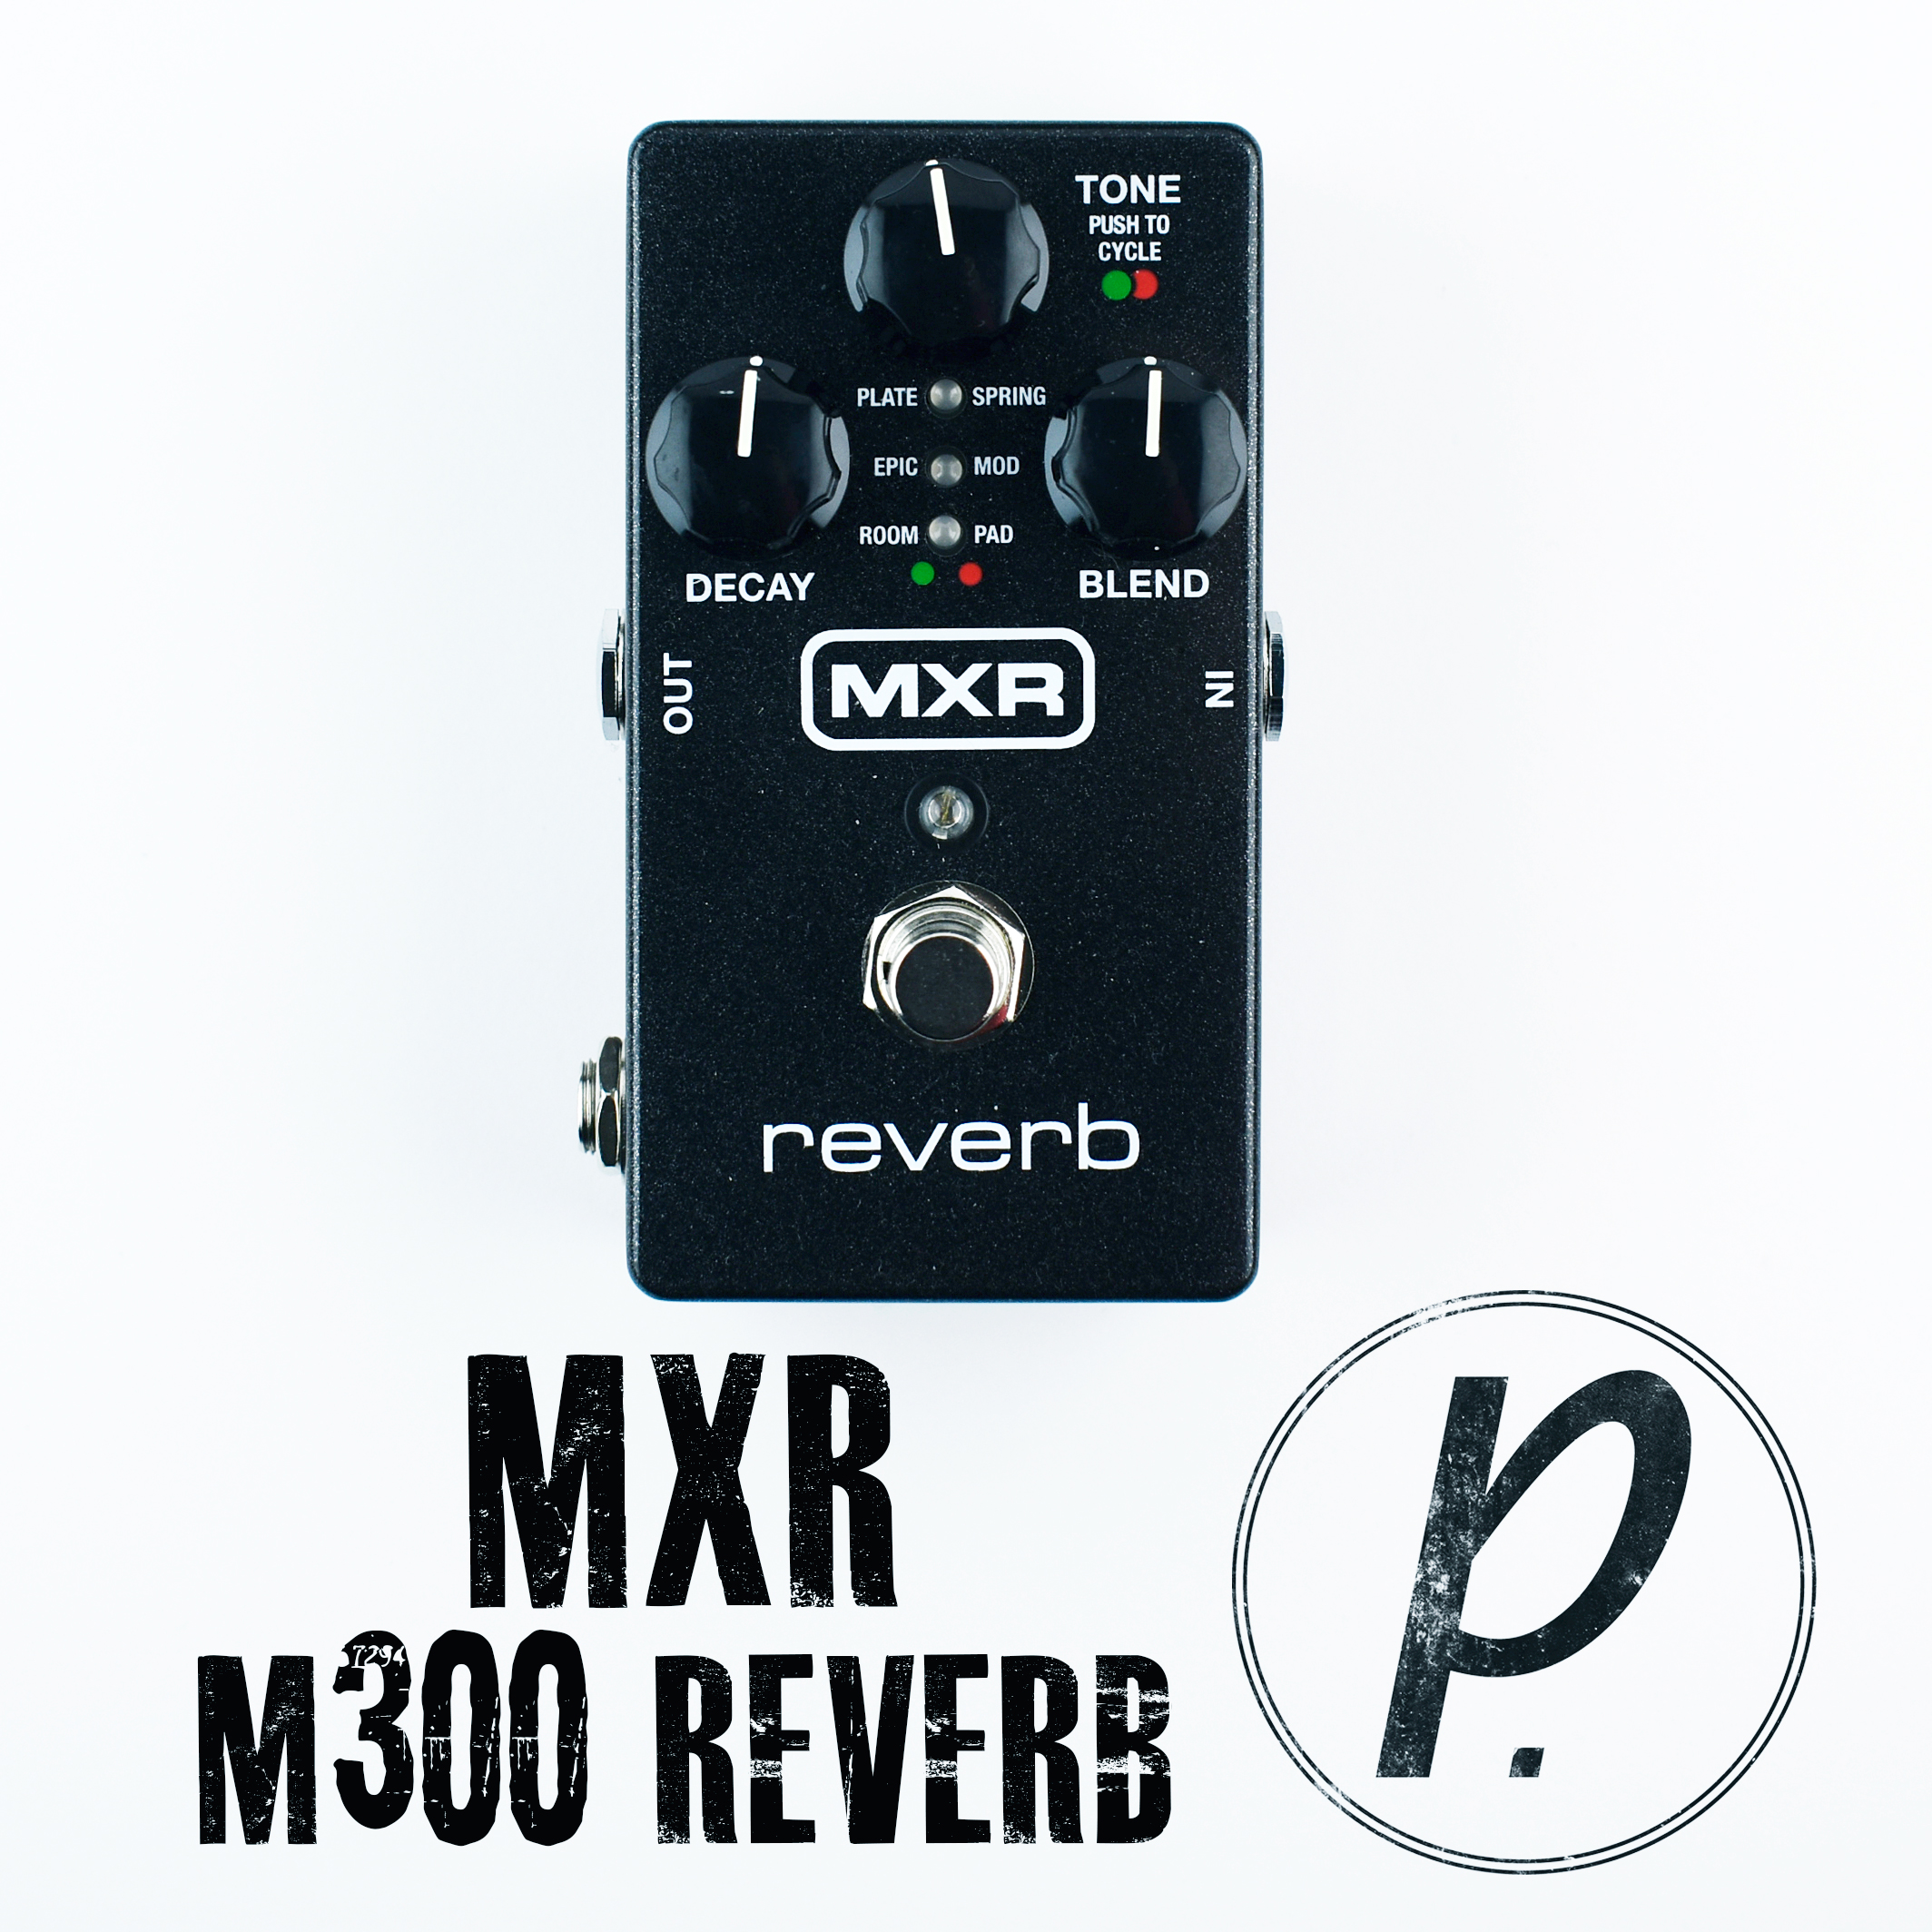 We dig a good reverb pedal, and we figured this new line of MXR pedals woul...